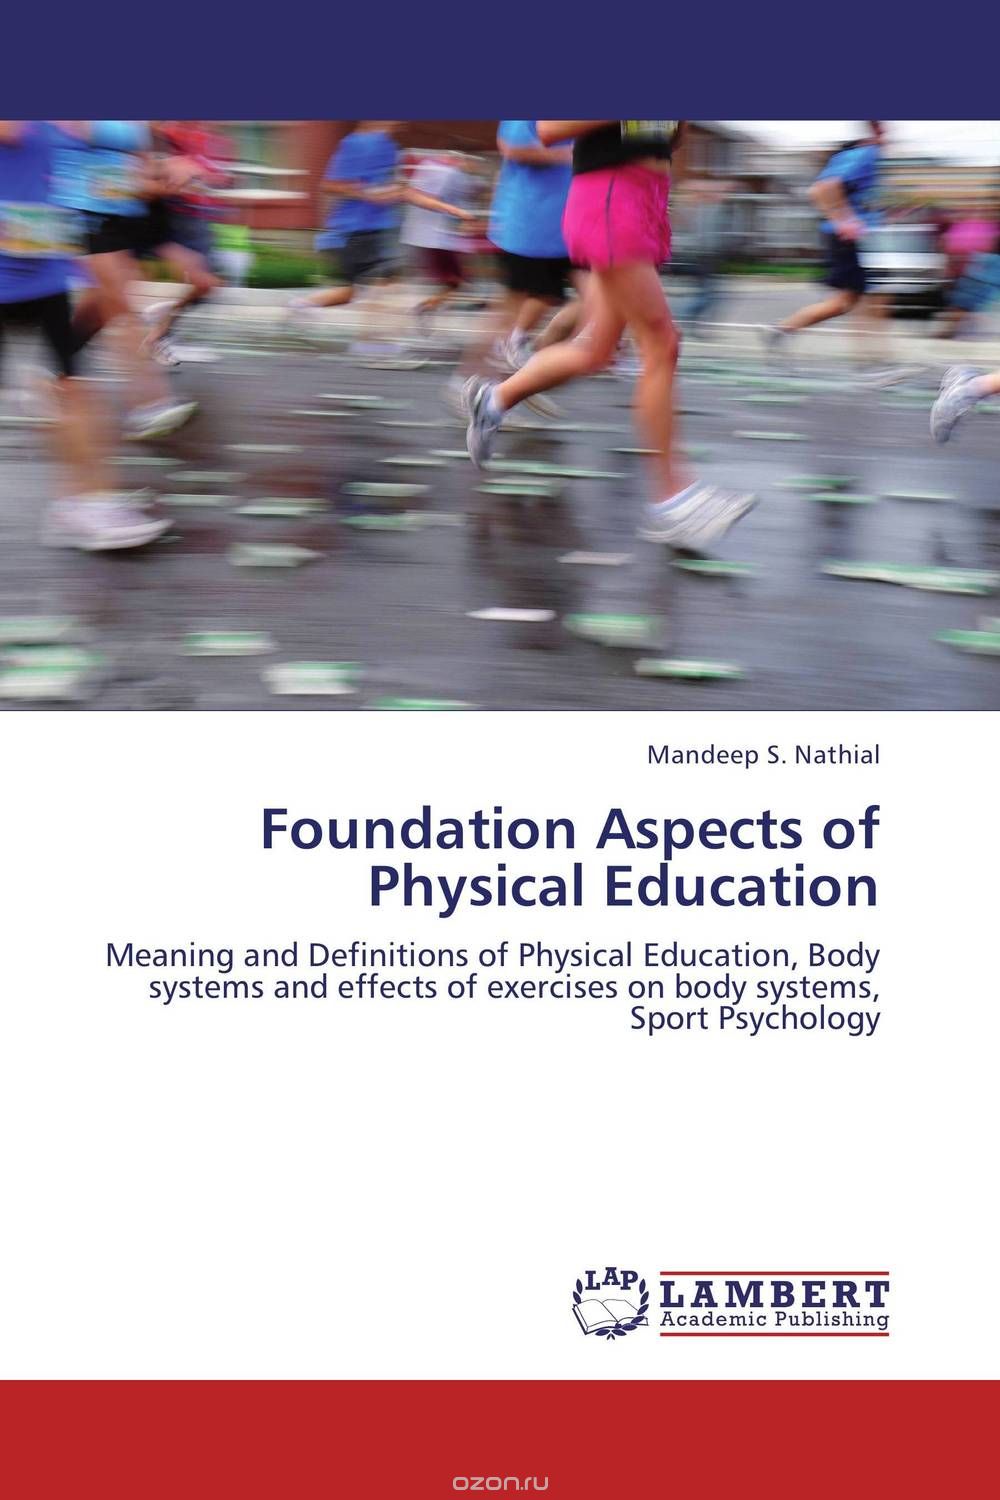 Foundation Aspects of Physical Education